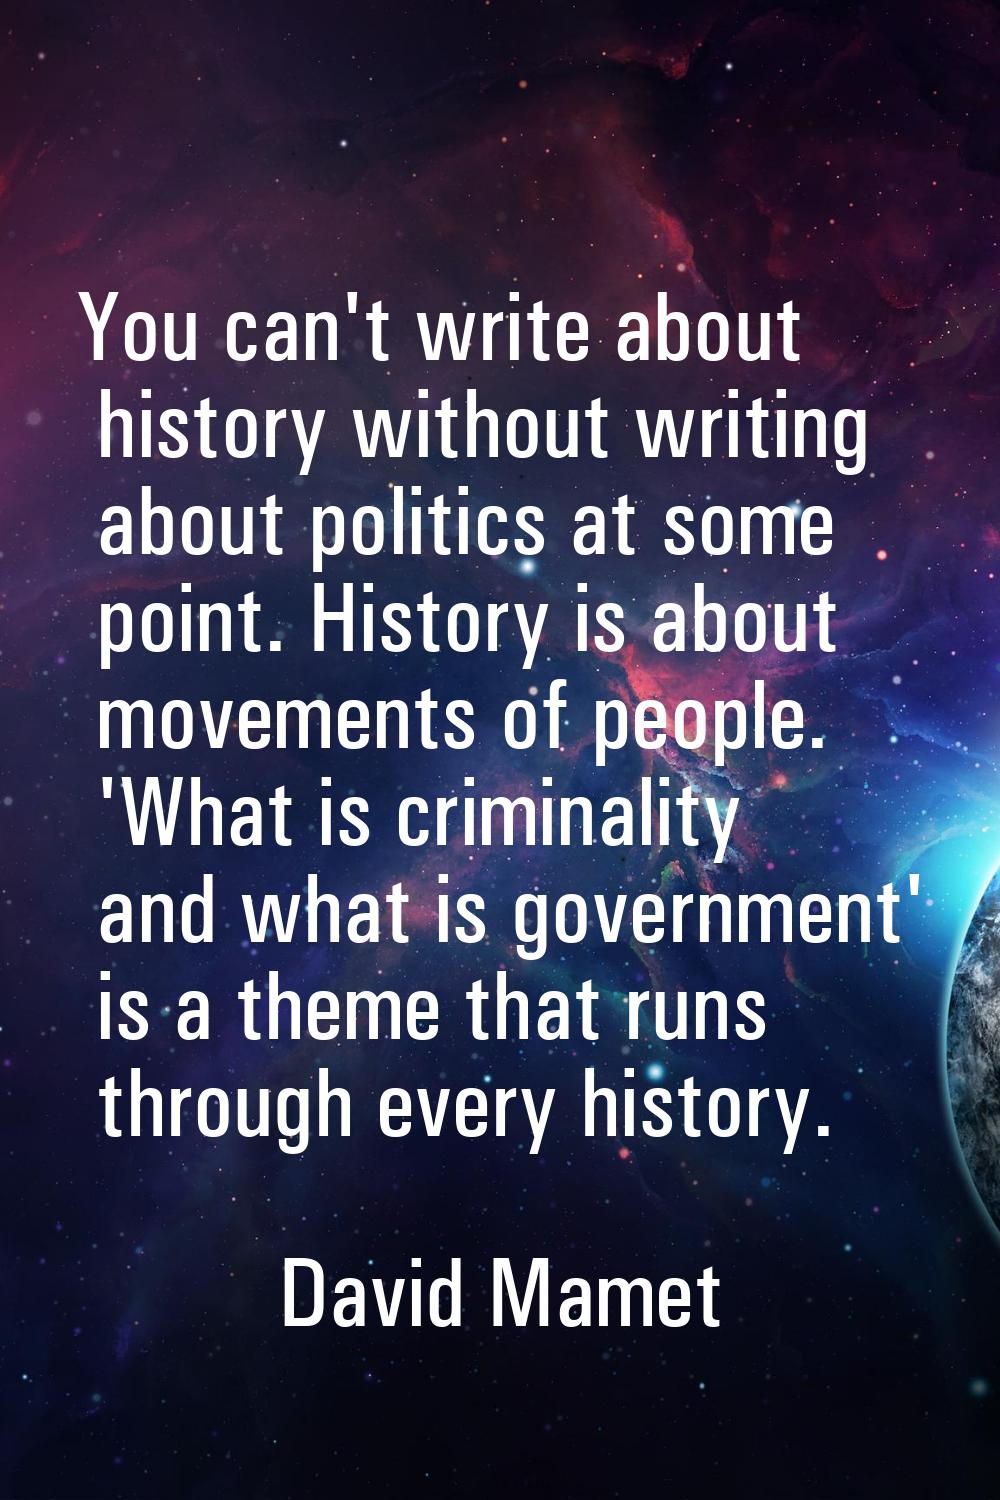 You can't write about history without writing about politics at some point. History is about moveme